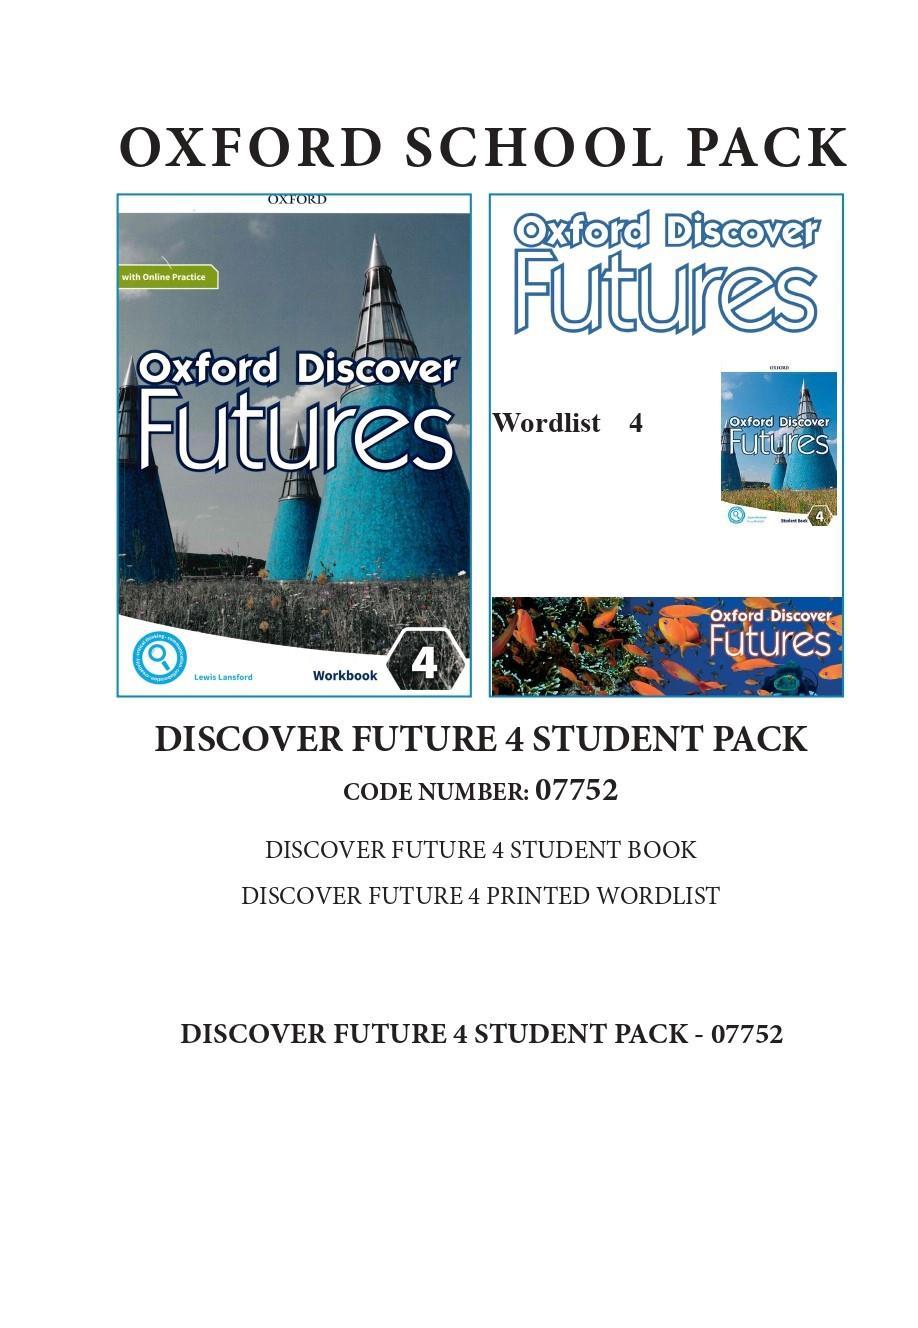 OXFORD DISCOVER FUTURES 4 STUDENT PACK - 07752